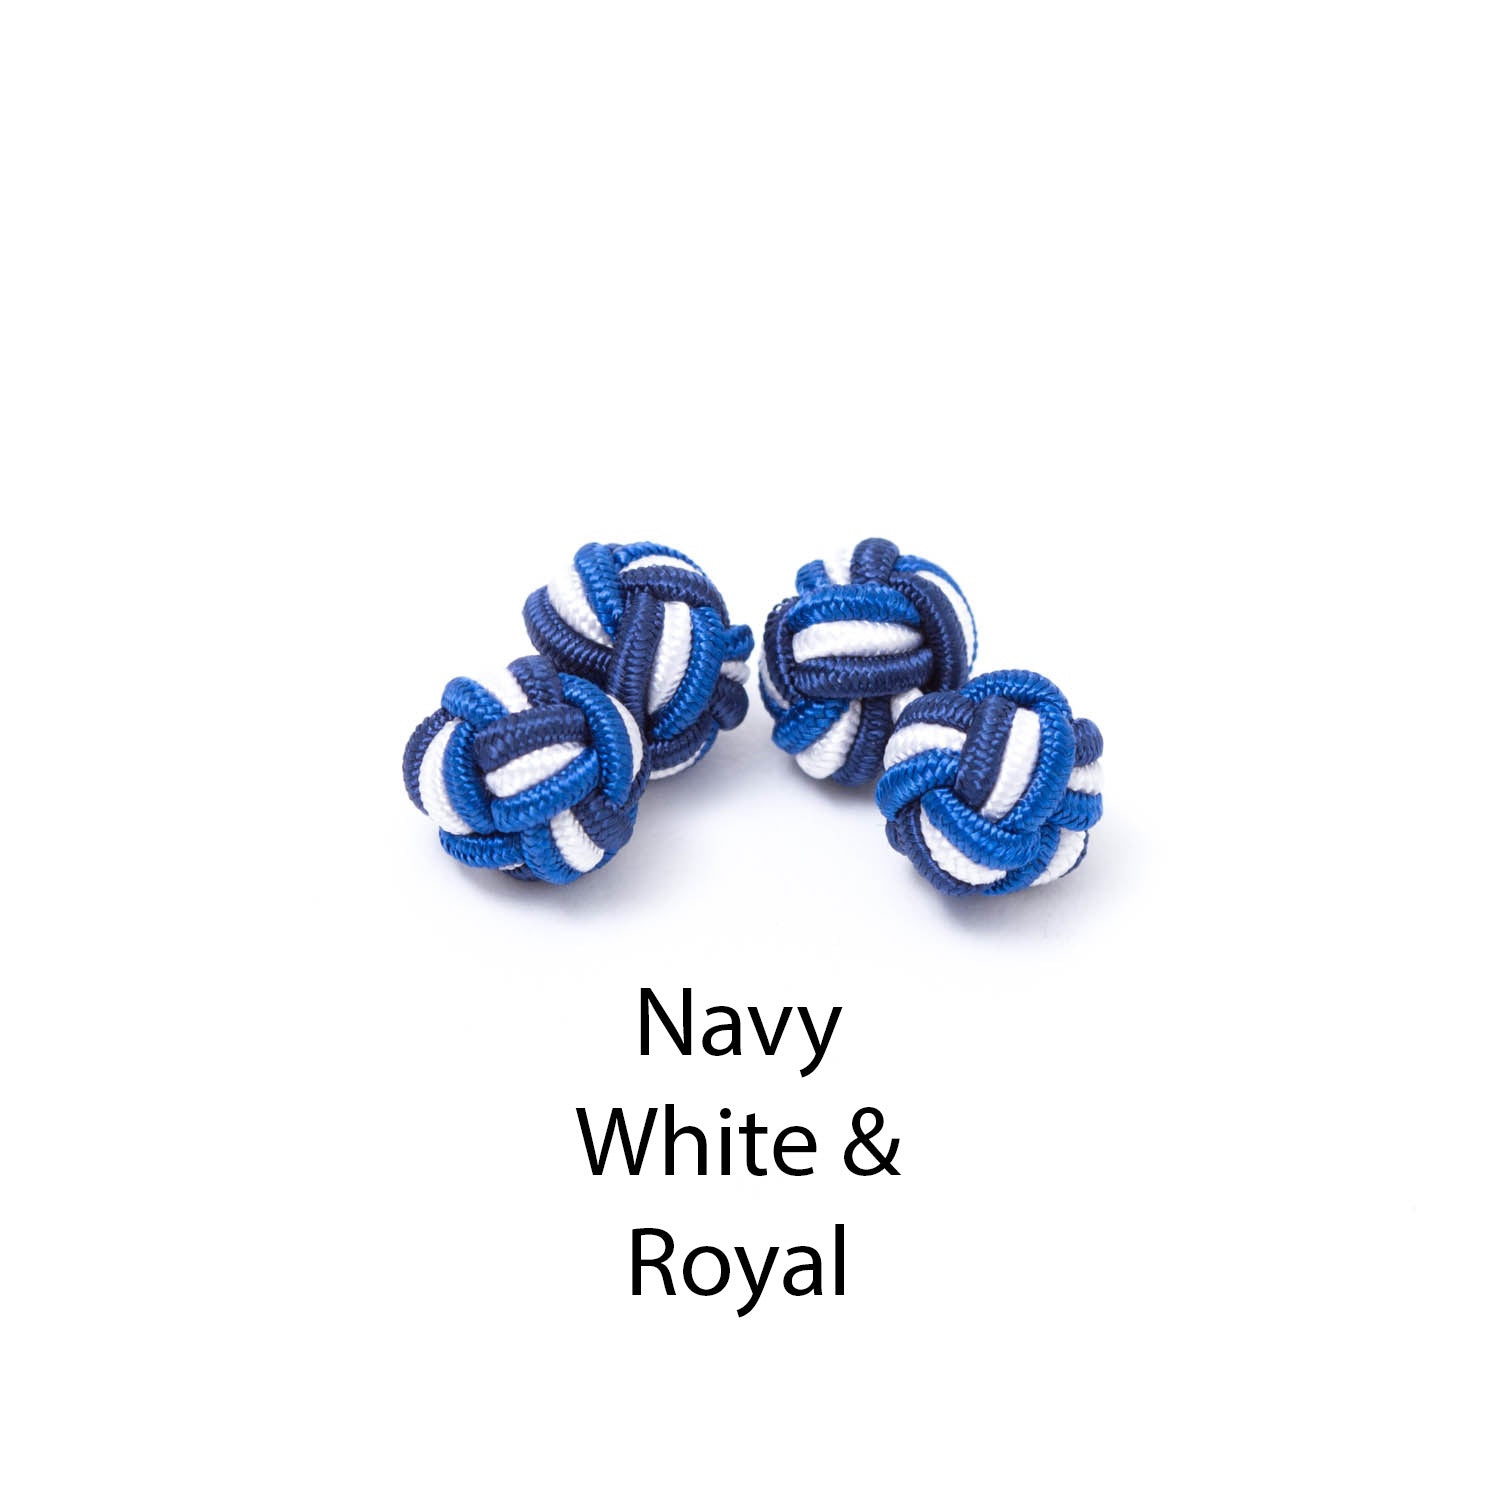 Tri-Colored Knot Cufflinks from KirbyAllison.com for a double-cuff shirt.